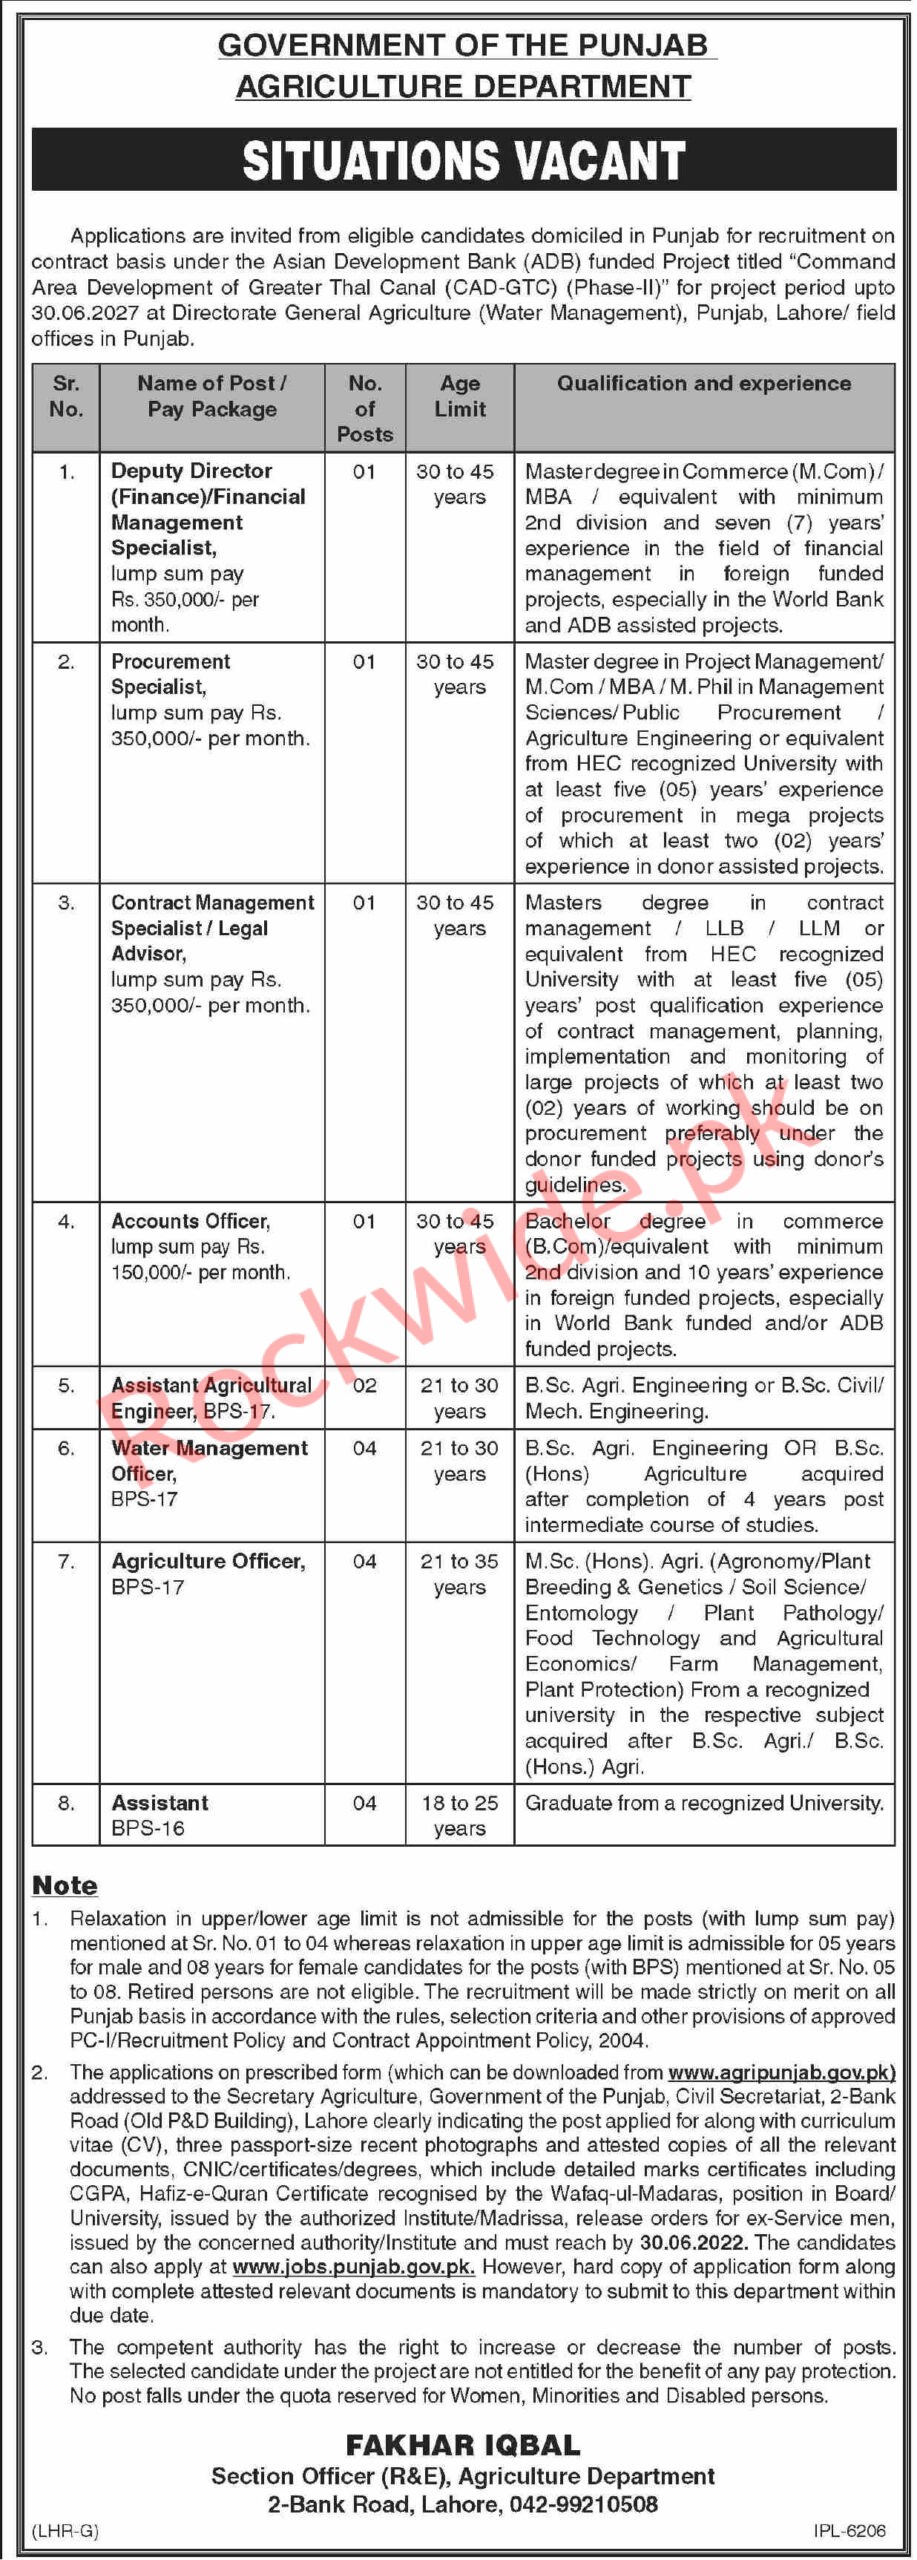 Government of Punjab Agriculture Department Jobs in Lahore